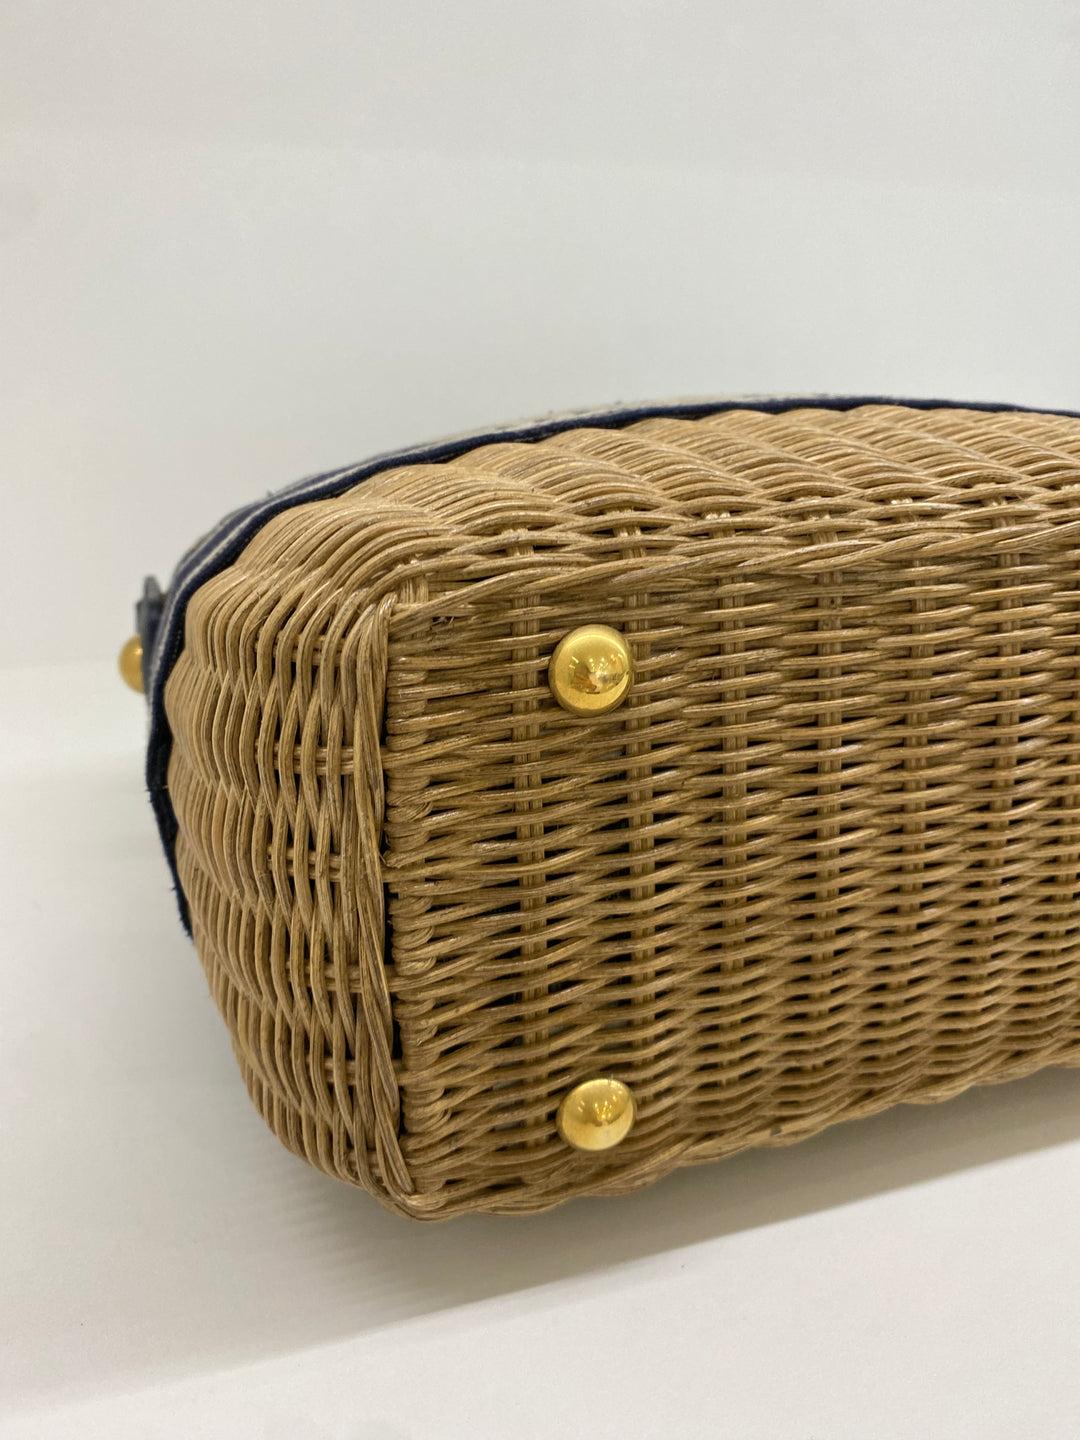 Christian Dior Wicker Bag For Sale 3